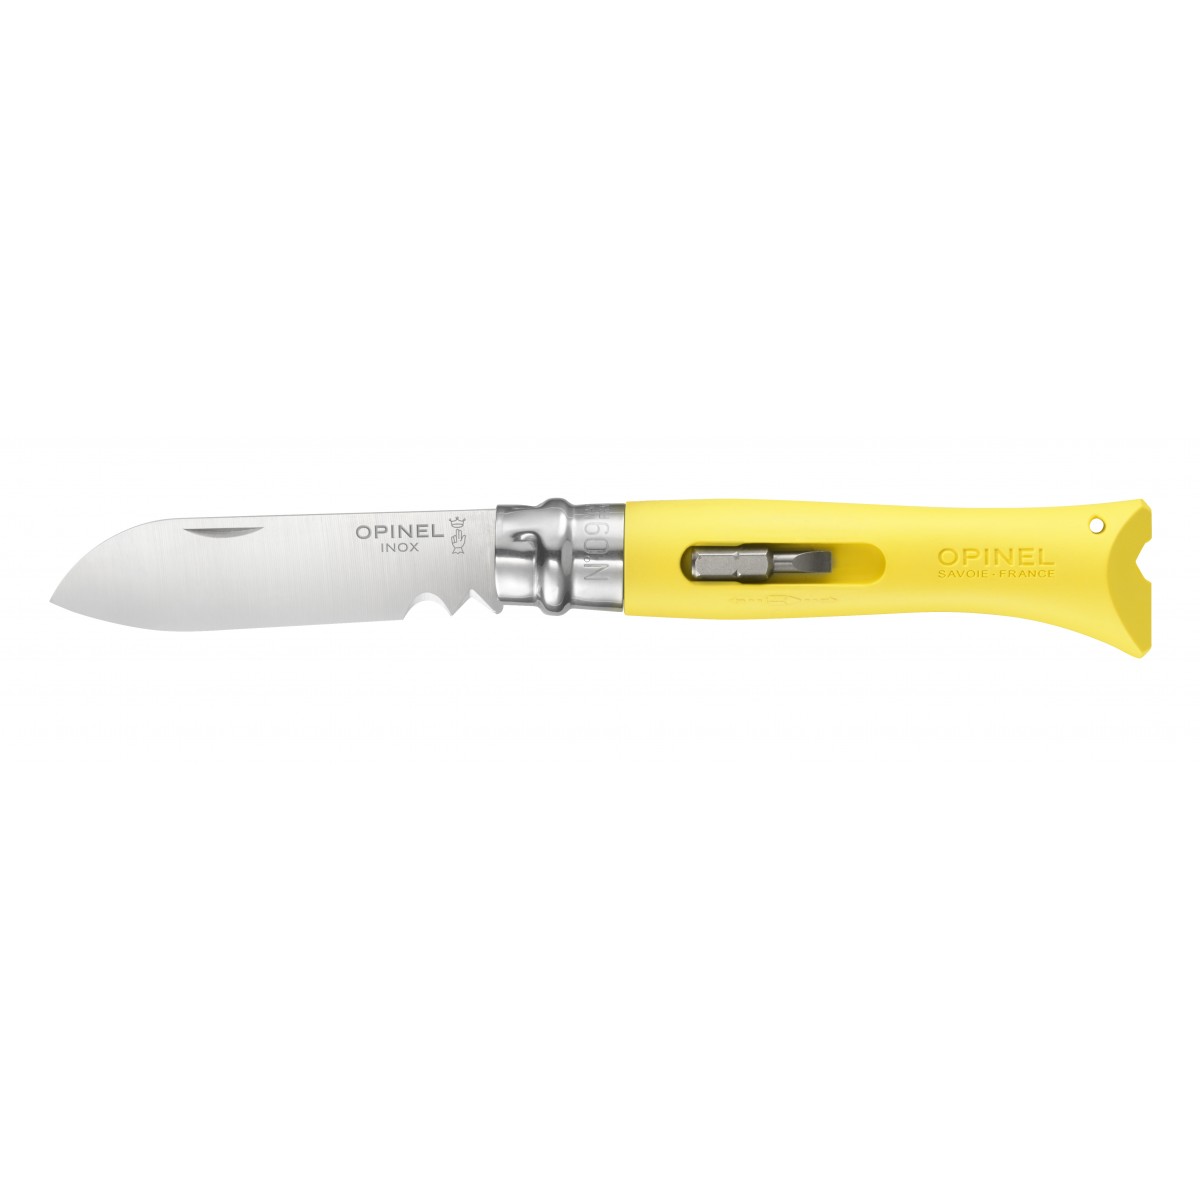 Opinel  Le couteau bricolage n°09 jaune